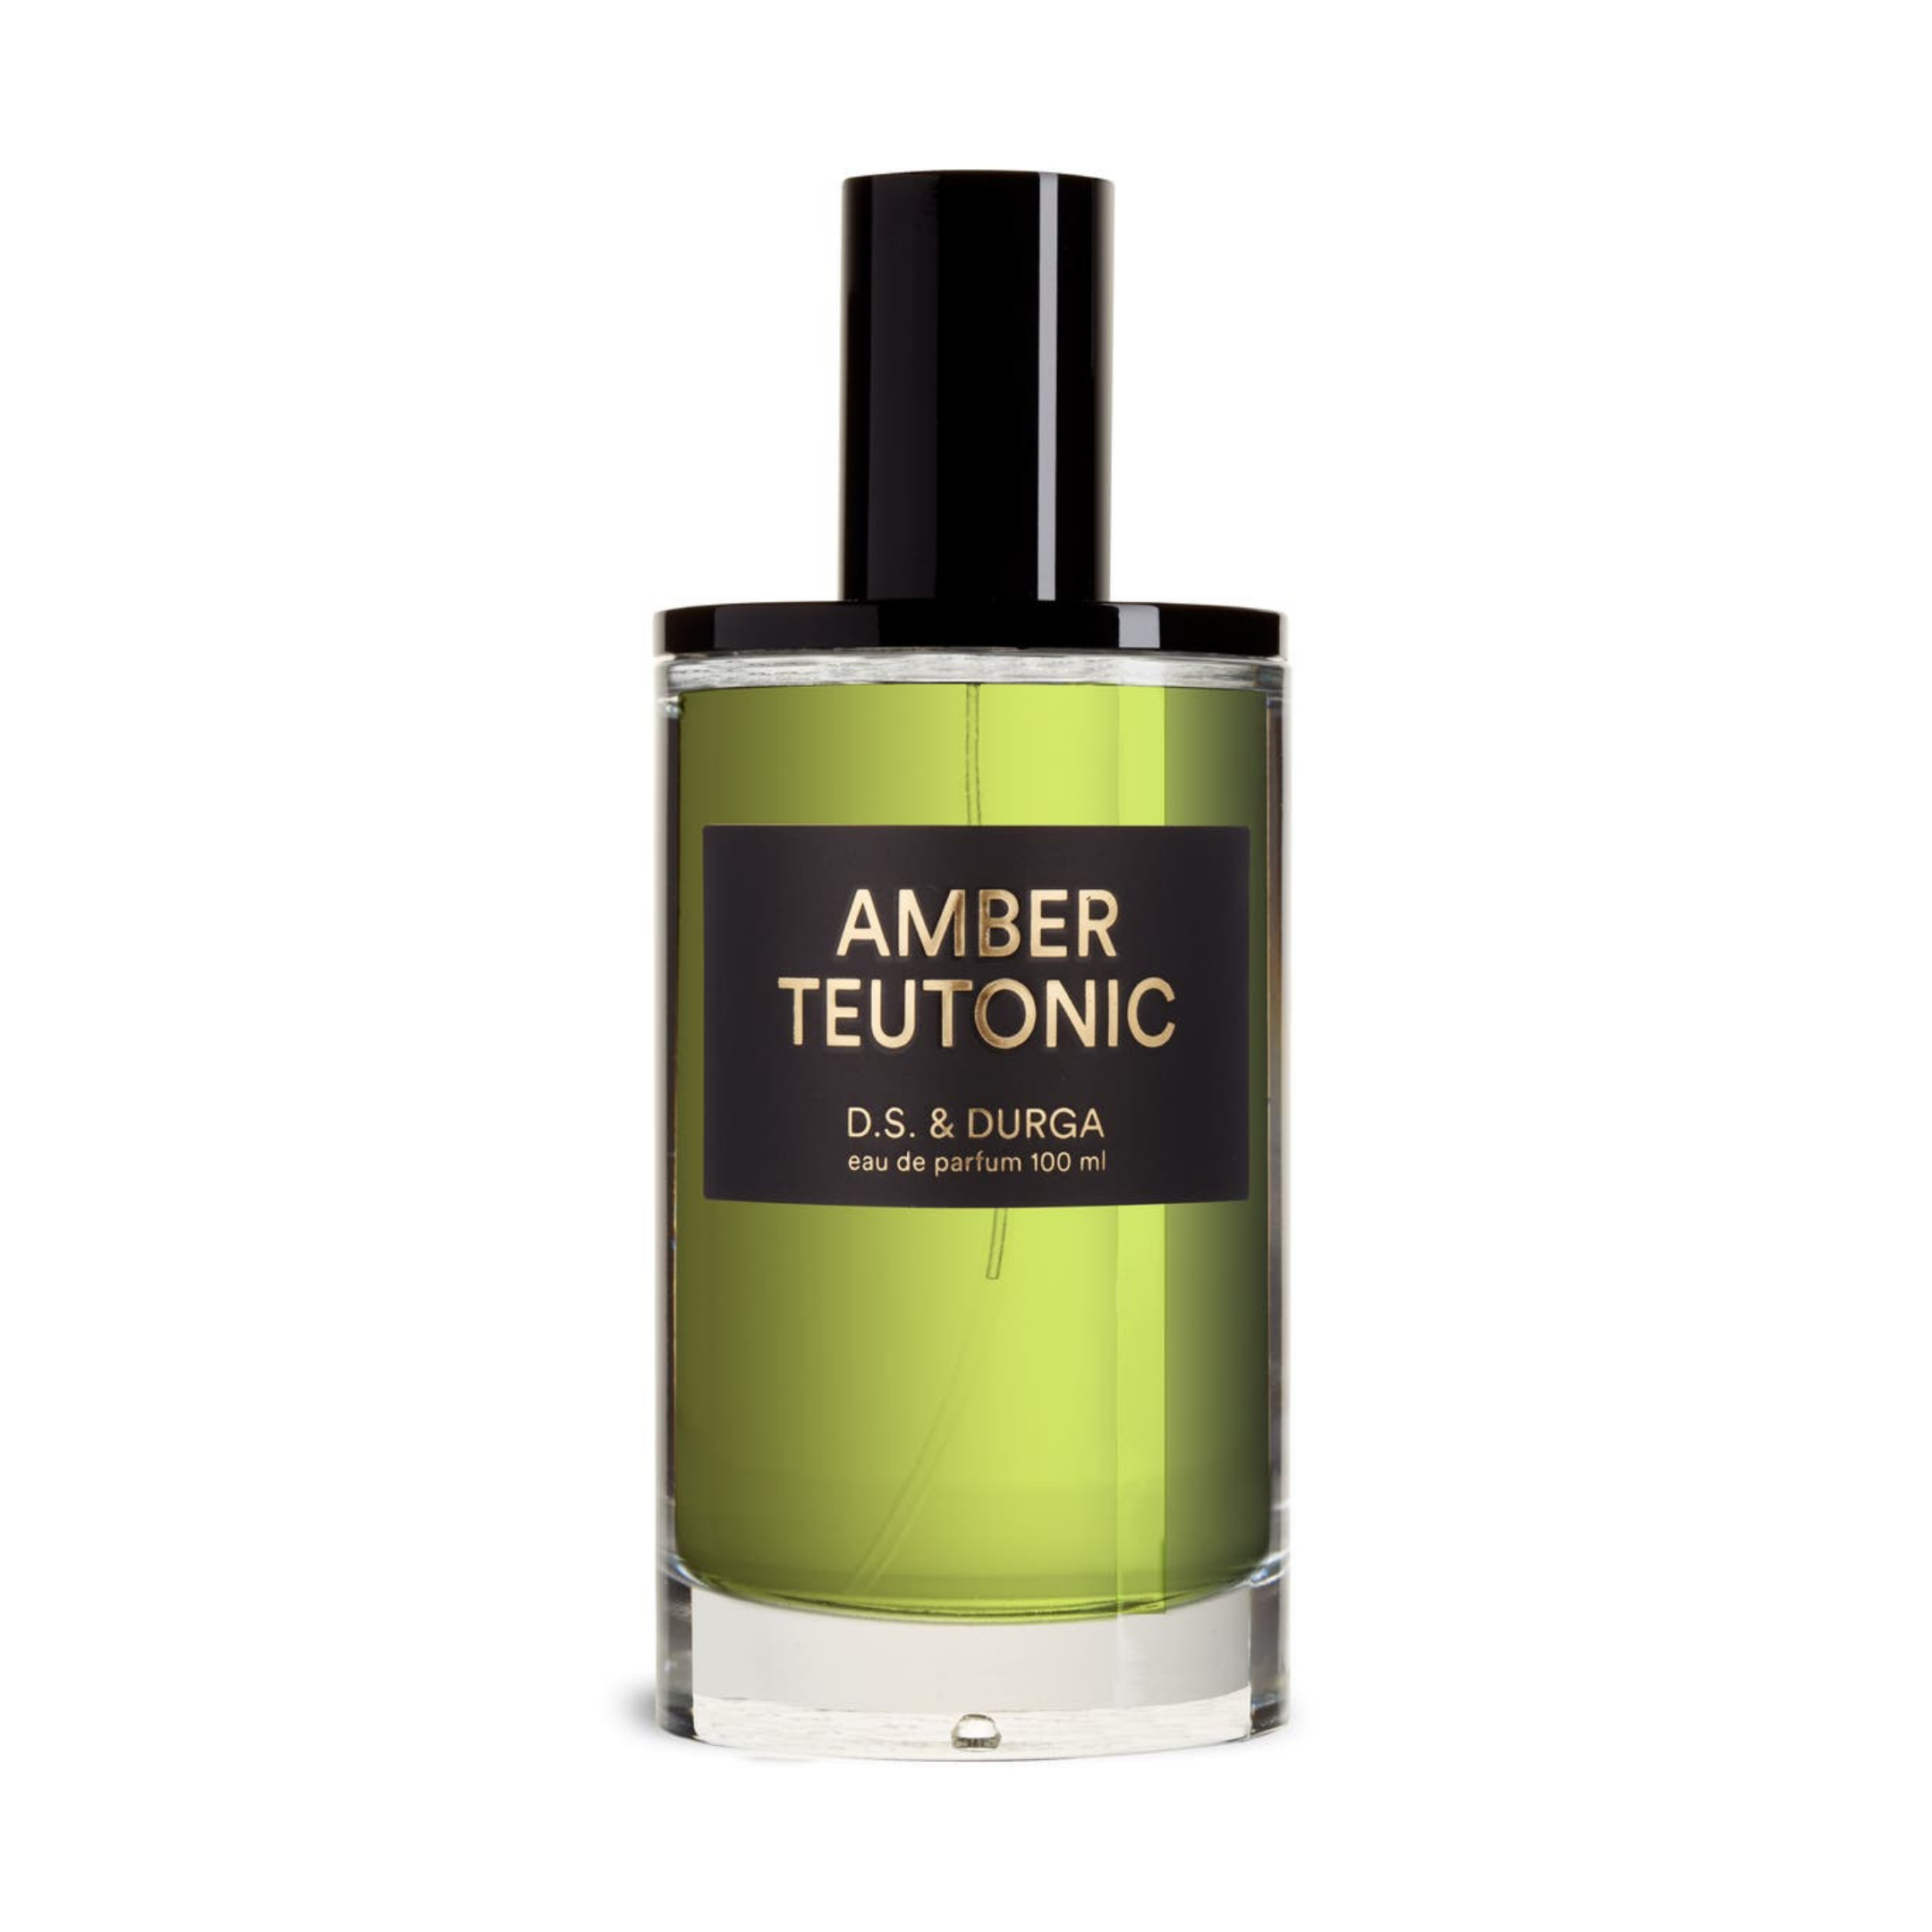 11 Exciting Unisex Fragrances For Him And Her